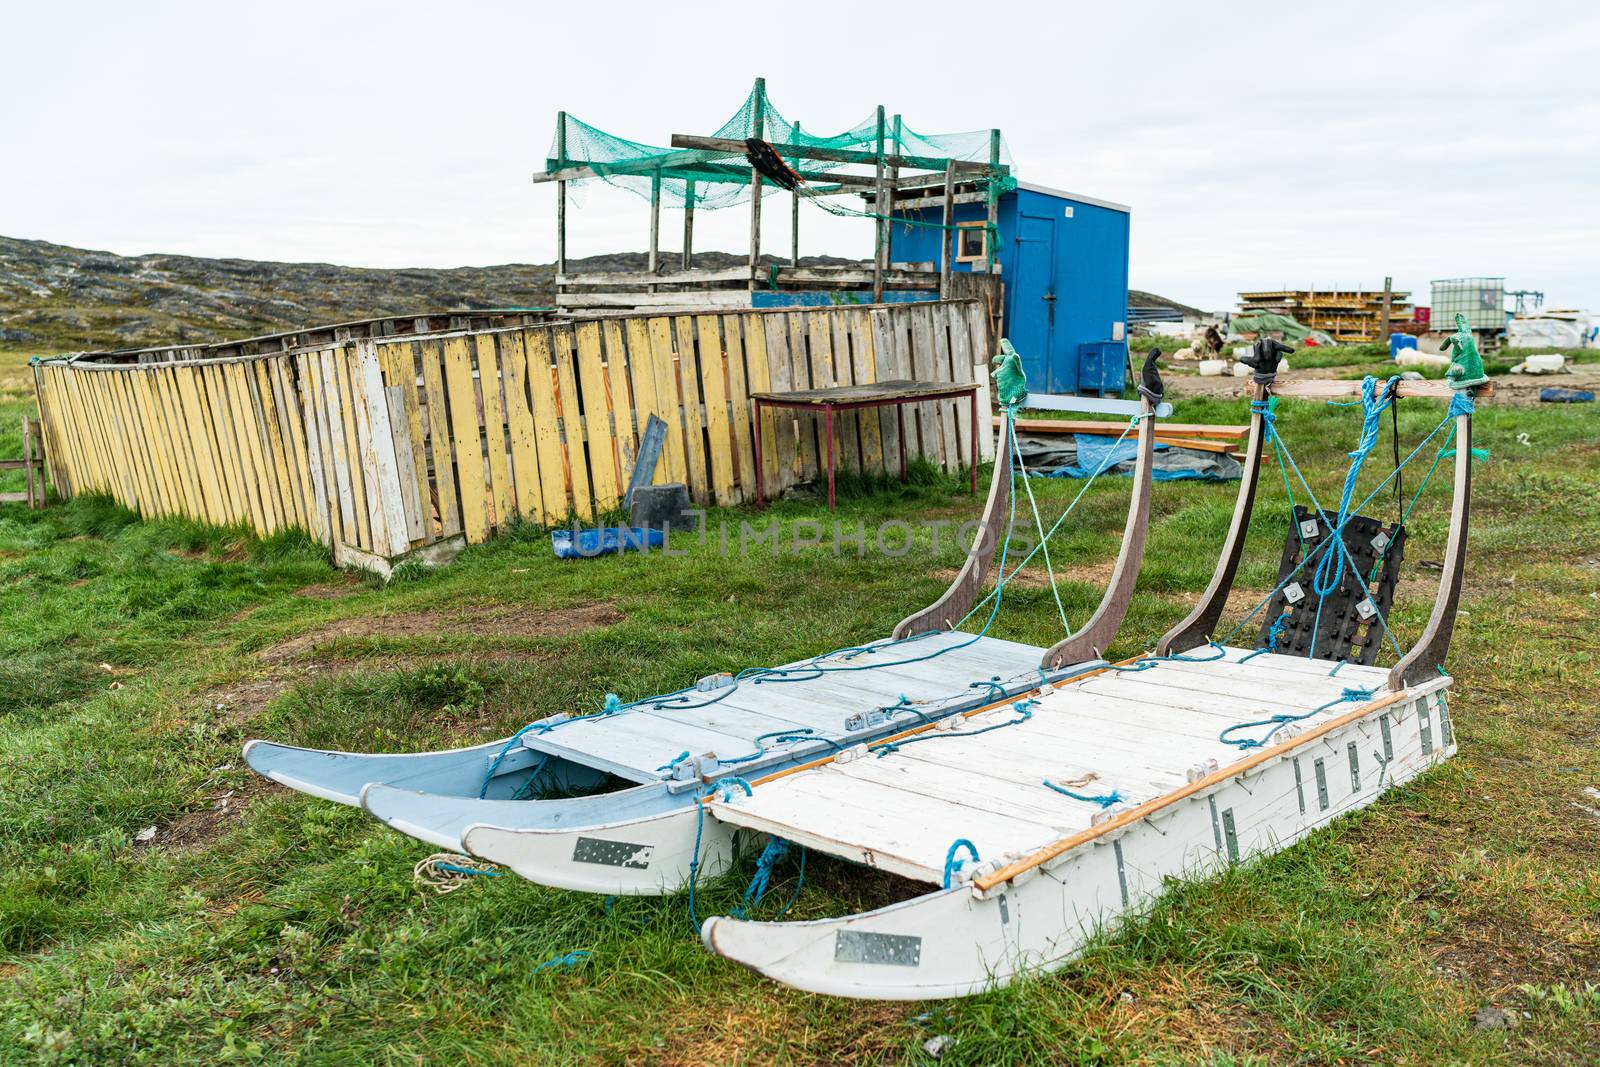 Greenland dog sled in Ilulissat Greenland. Two dog sleds parked in summer nature landscape on Greenland.